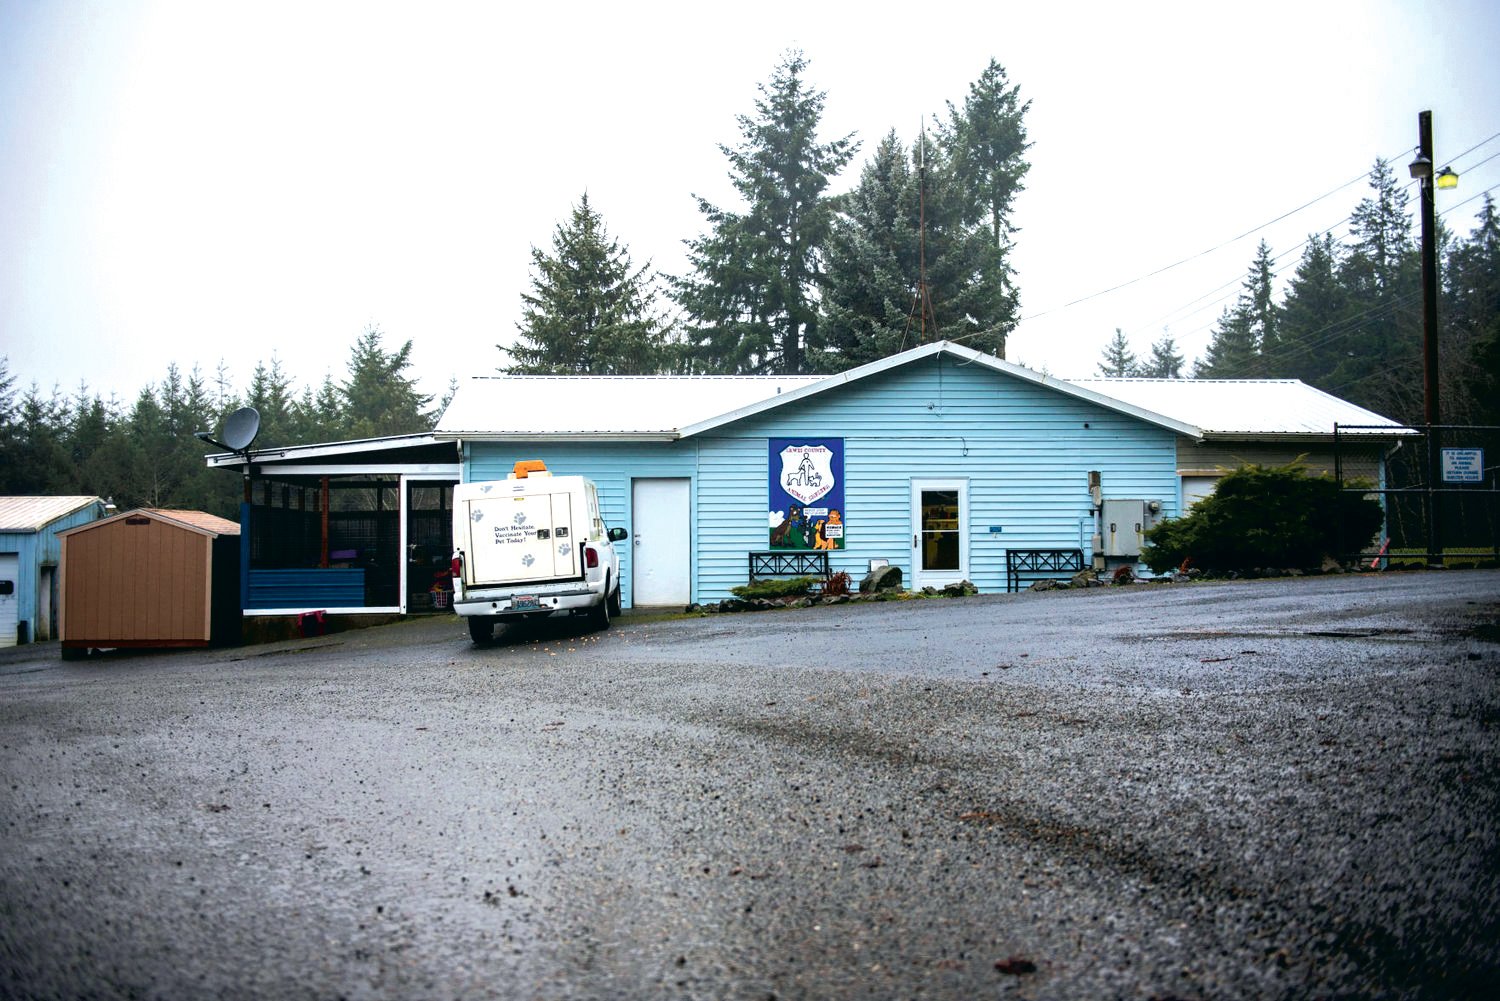 The Lewis County Animal Shelter, pictured here in a Chronicle file photo, is located at 560 Centralia Alpha Road in Chehalis.